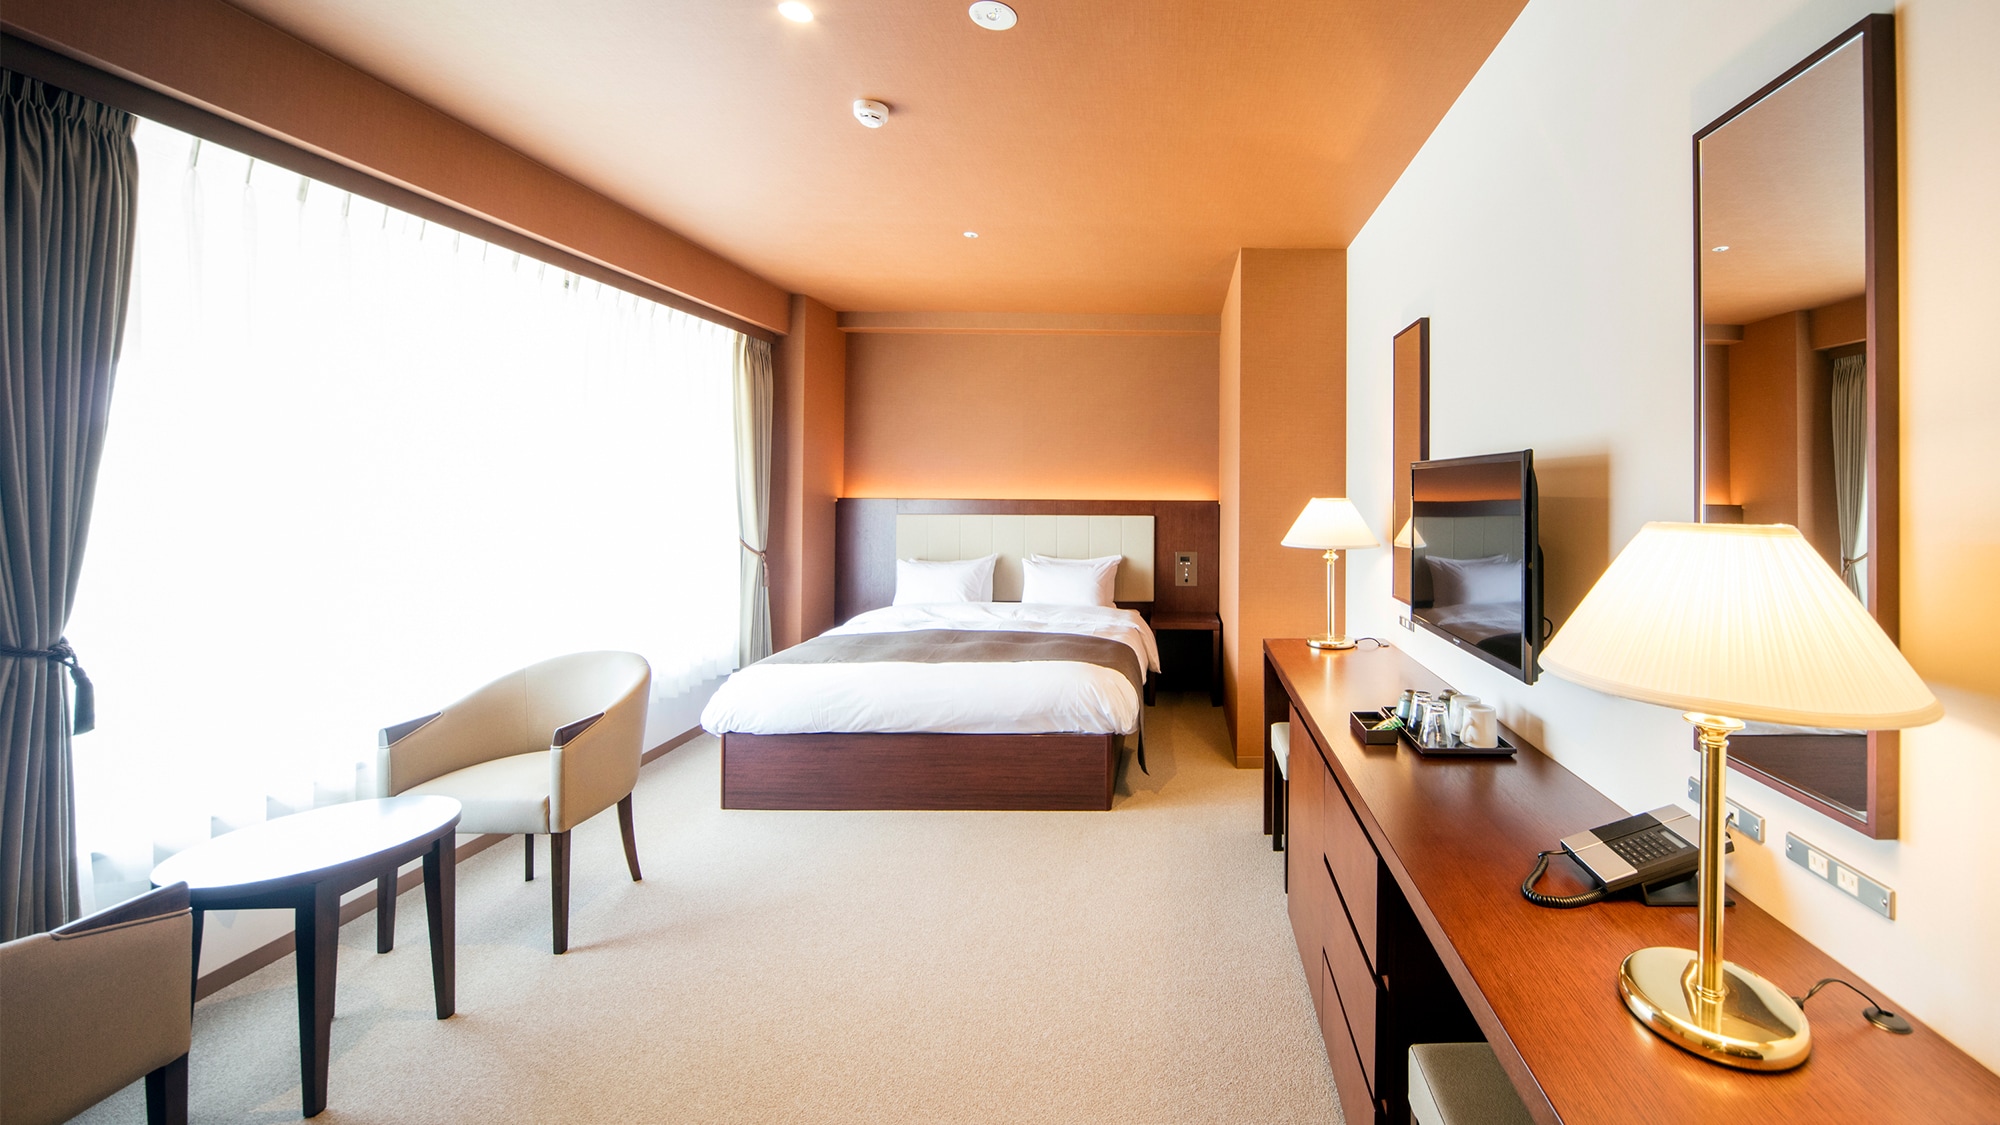 [Standard Double] Our standard double room with a feeling of liberation.